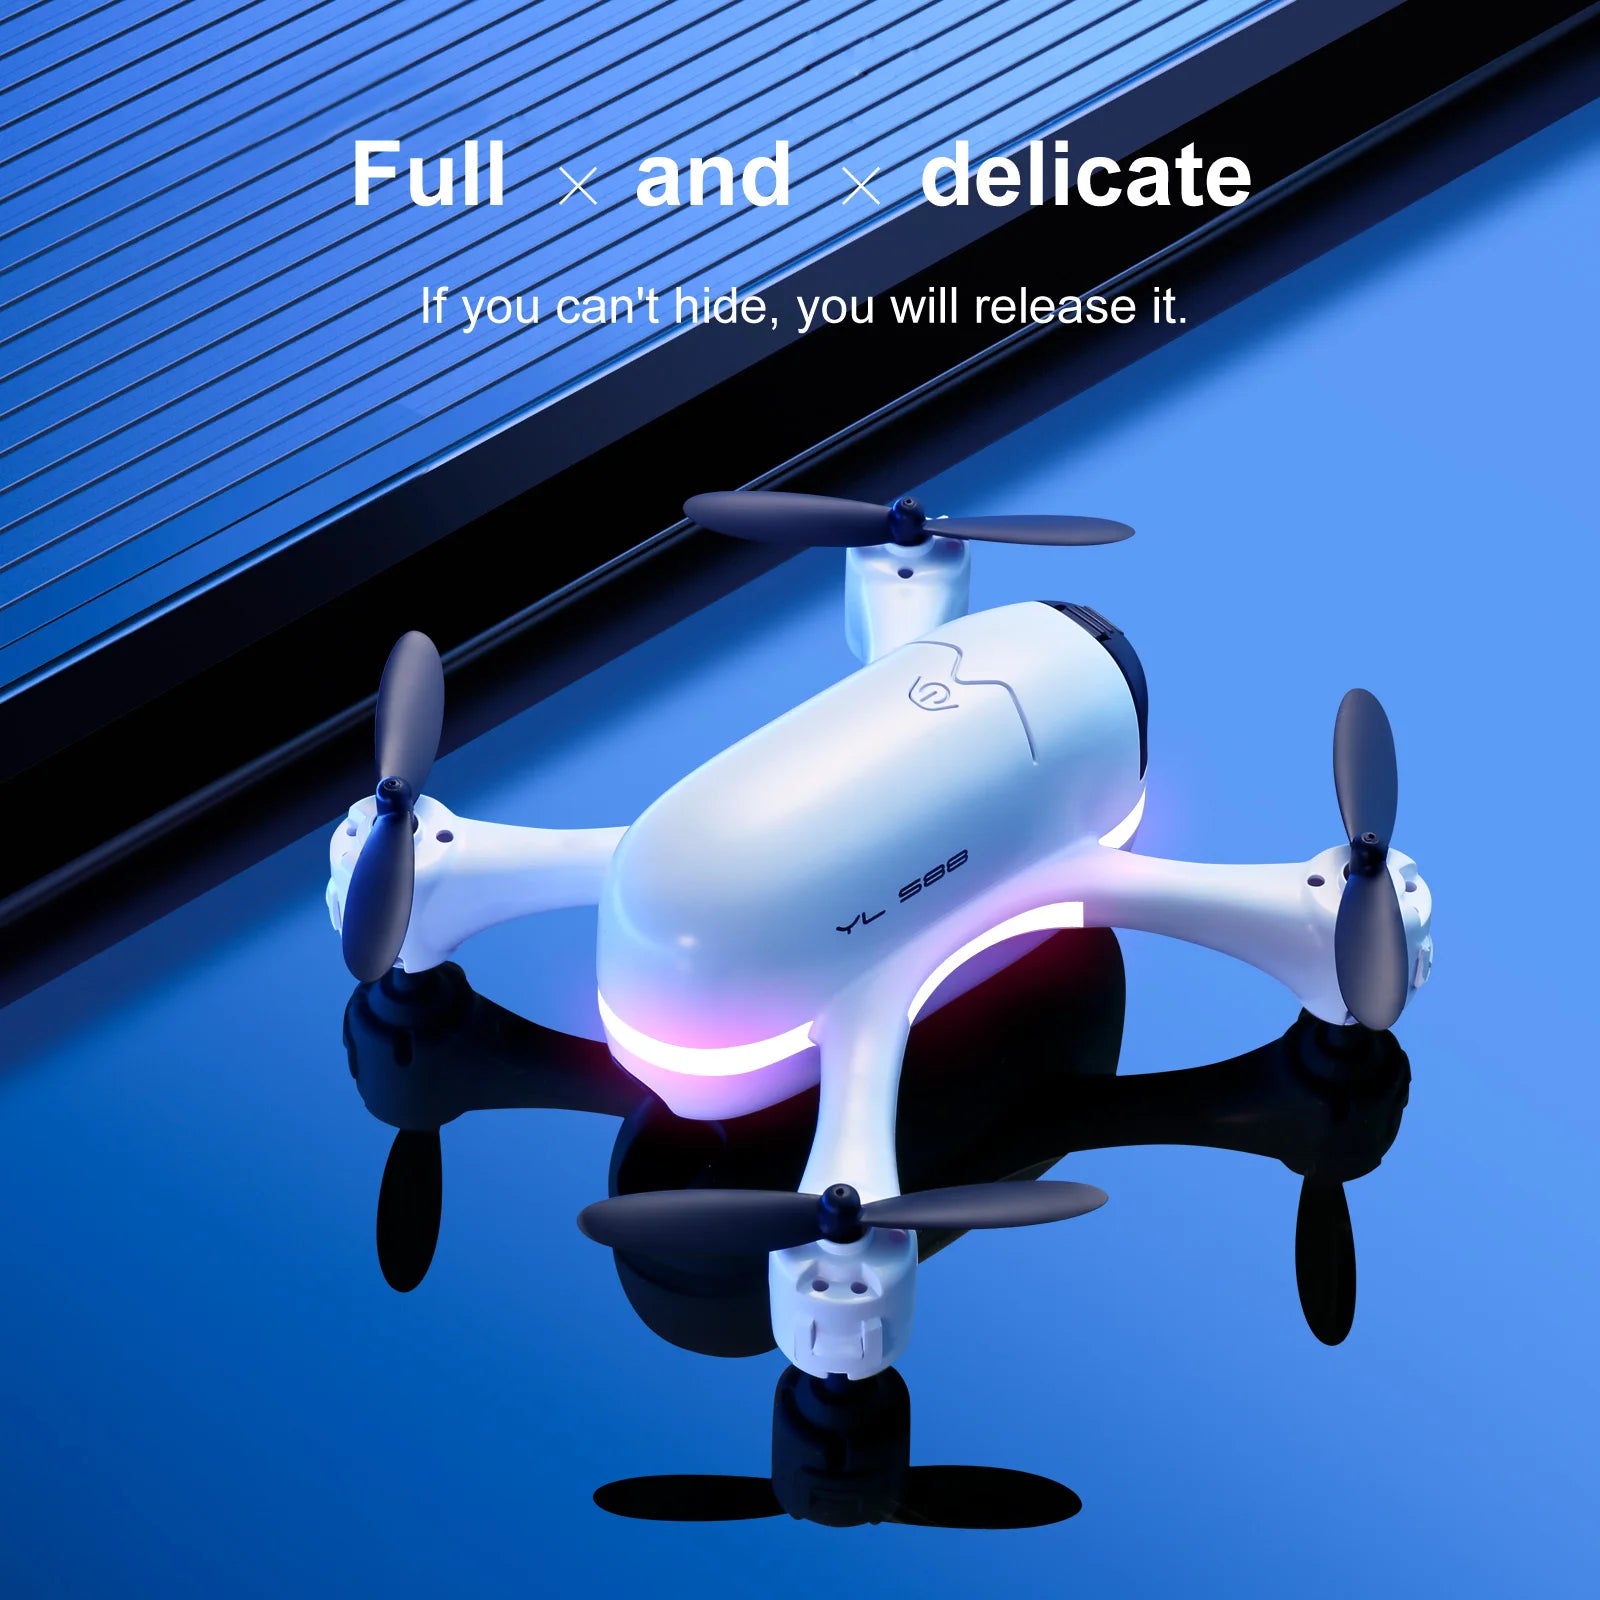 S88 Drone, the quad-rotor fuselage is made of high-strength engineering plastic 